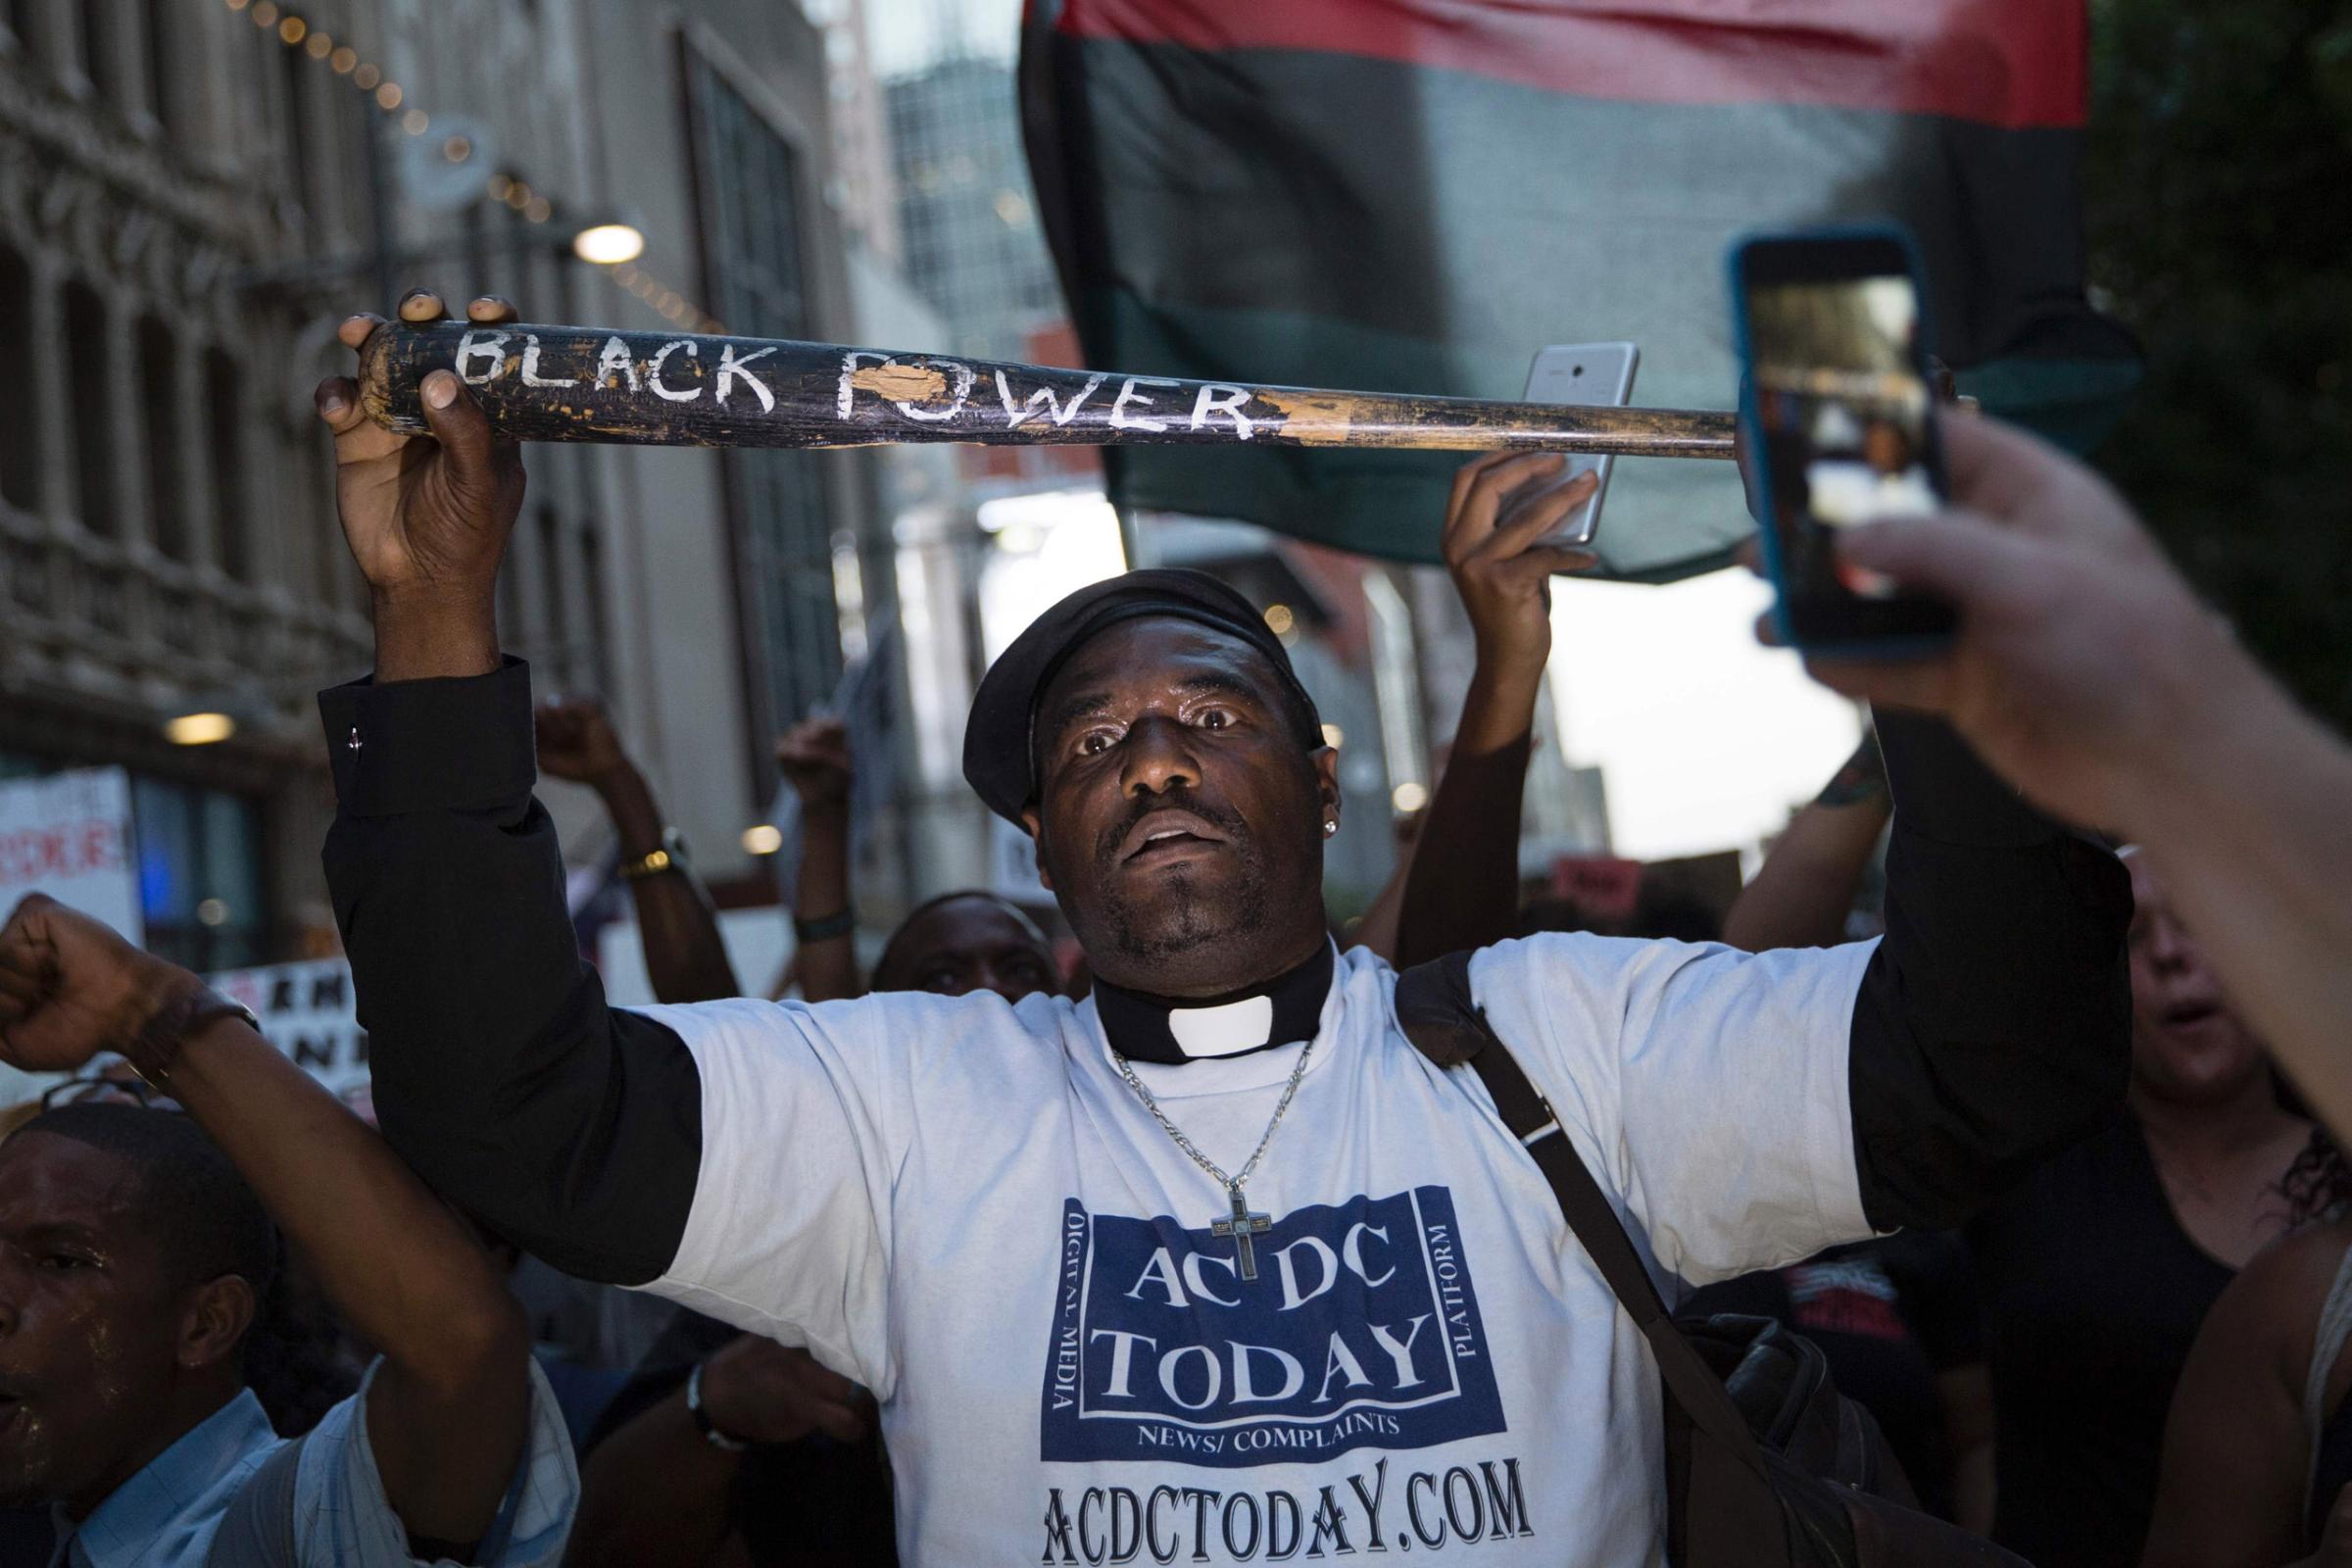 TOPSHOT-US-CRA man holds a bat reading "Black Power" during a protest in Dallas on July 7, 2016.